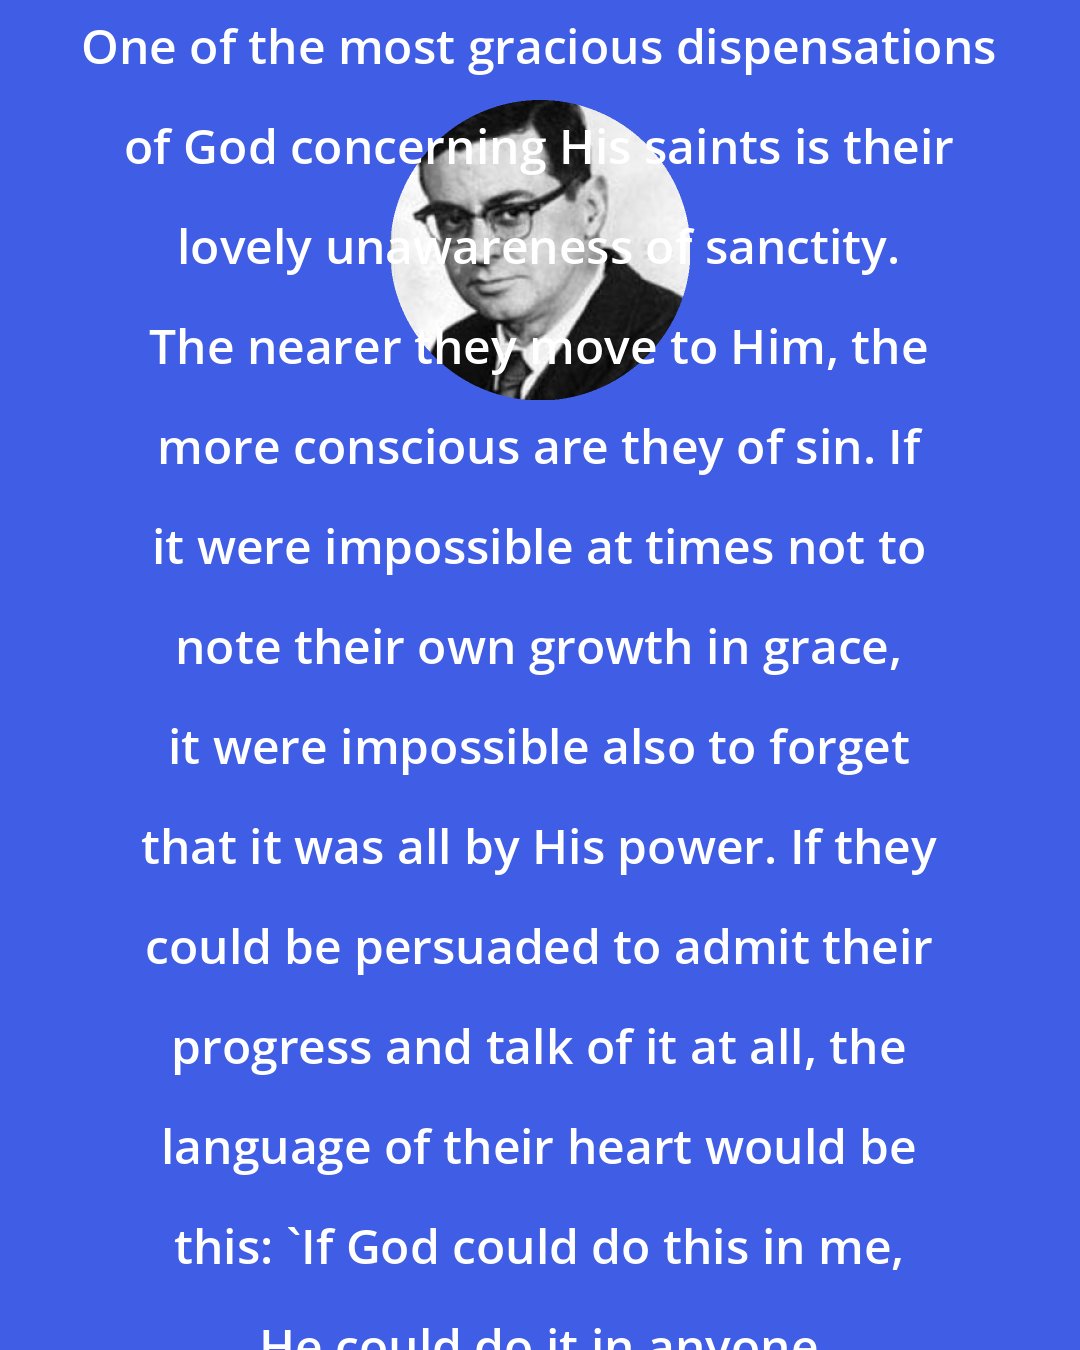 Bill Vaughan: One of the most gracious dispensations of God concerning His saints is their lovely unawareness of sanctity. The nearer they move to Him, the more conscious are they of sin. If it were impossible at times not to note their own growth in grace, it were impossible also to forget that it was all by His power. If they could be persuaded to admit their progress and talk of it at all, the language of their heart would be this: 'If God could do this in me, He could do it in anyone